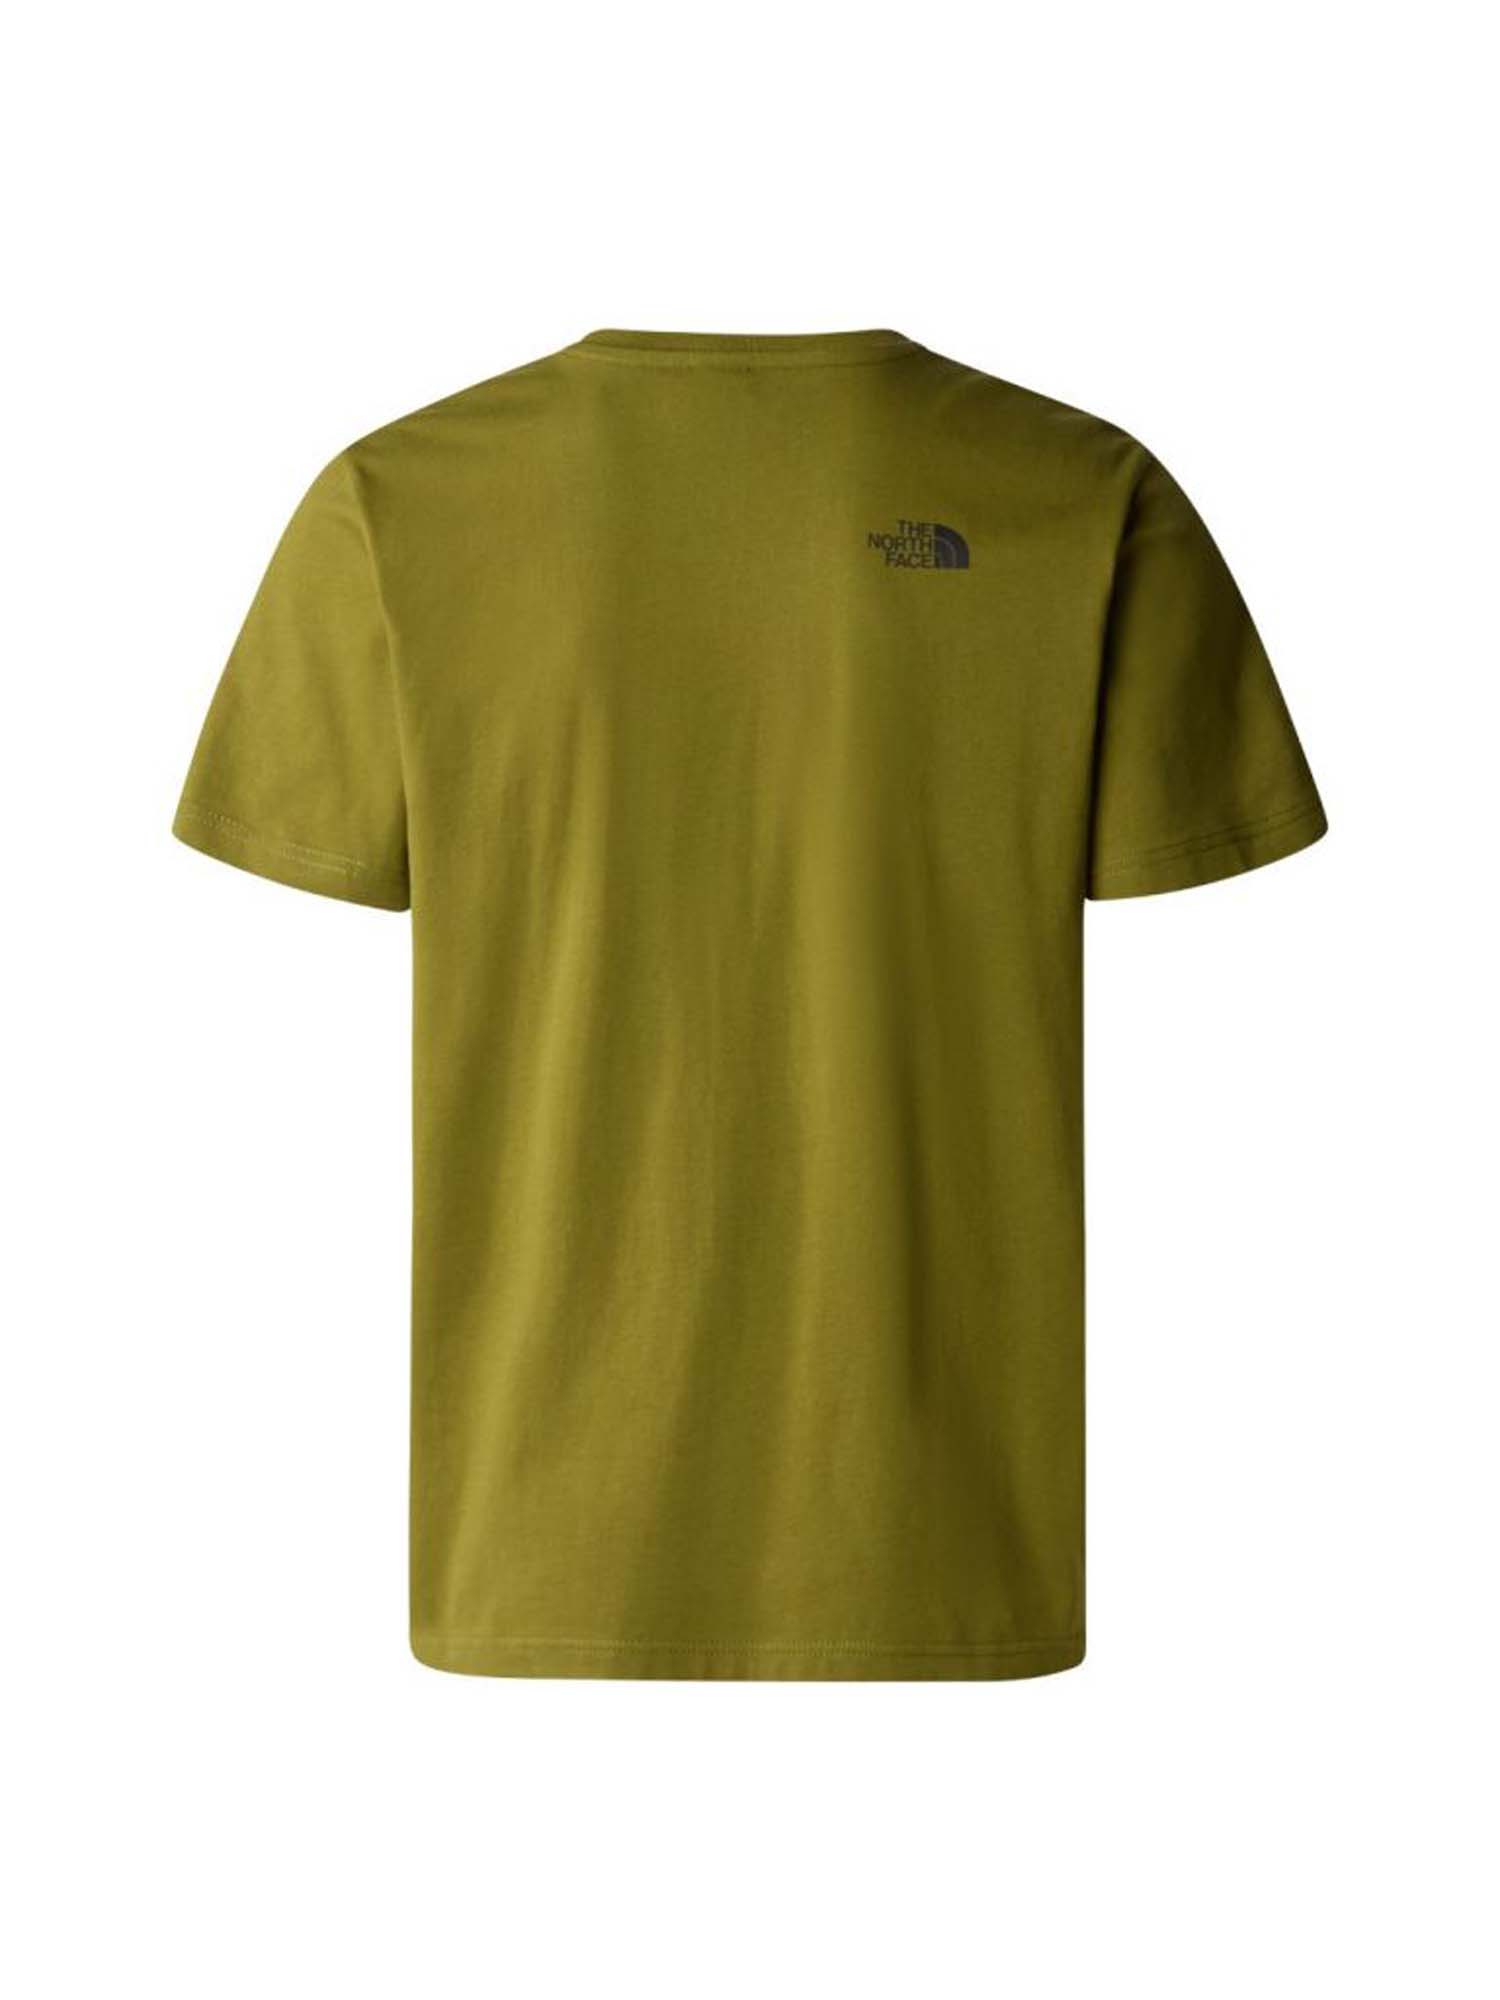 THE NORTH FACE M ex s/s easy tee